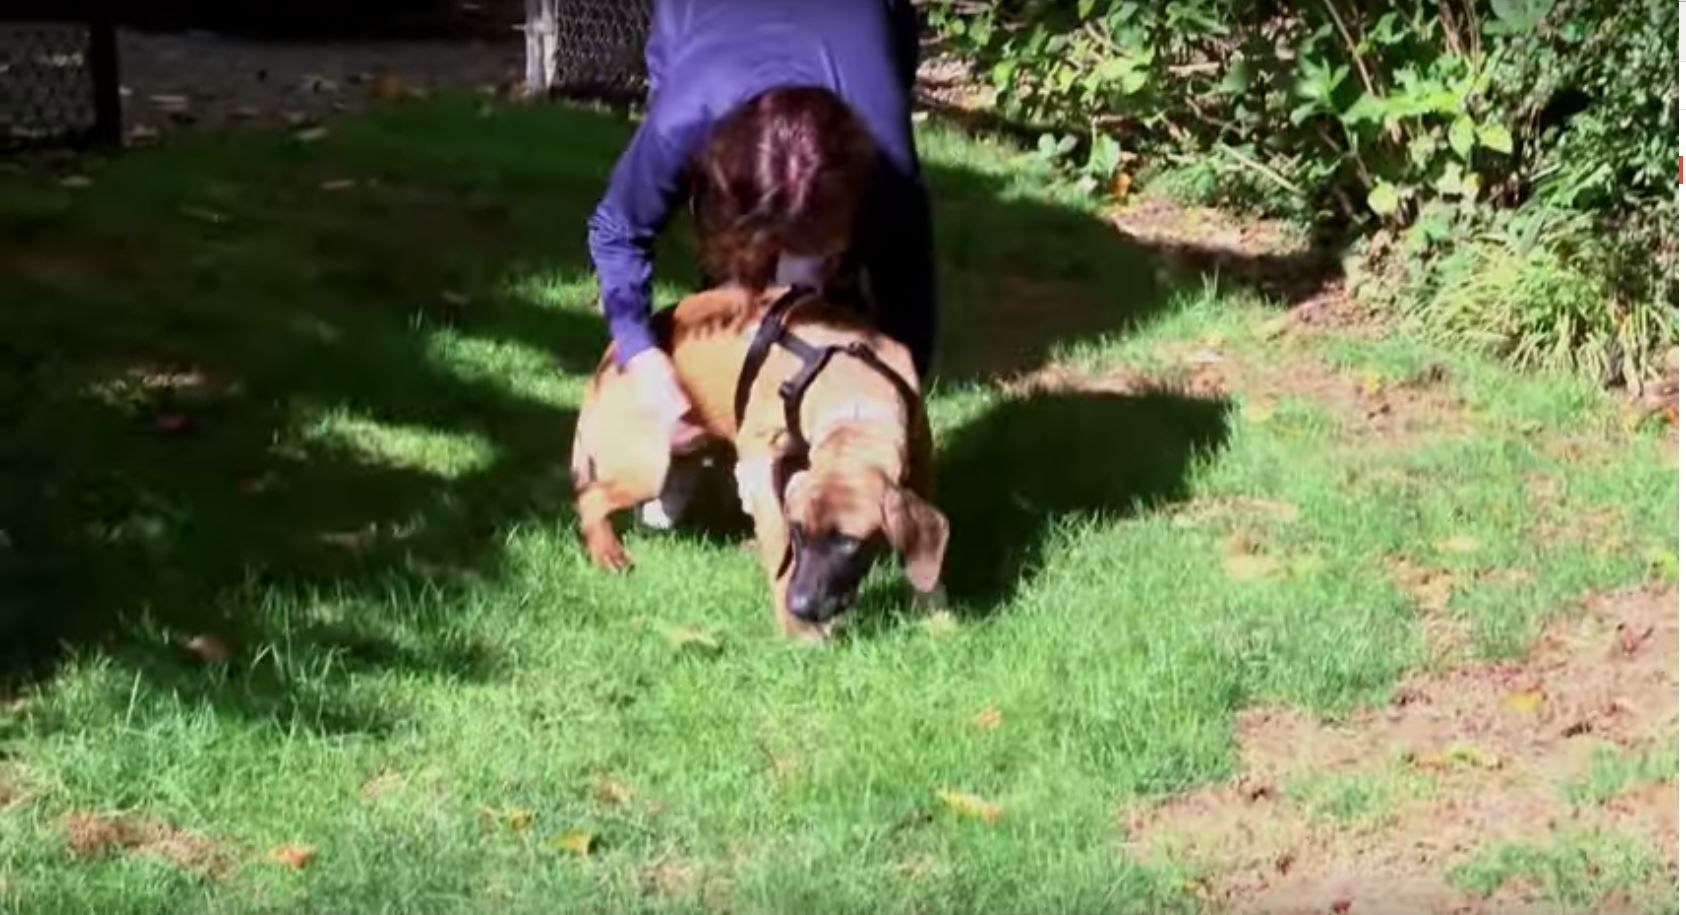 Dog Feels Grass For First Time After Rescue From Meat Farm